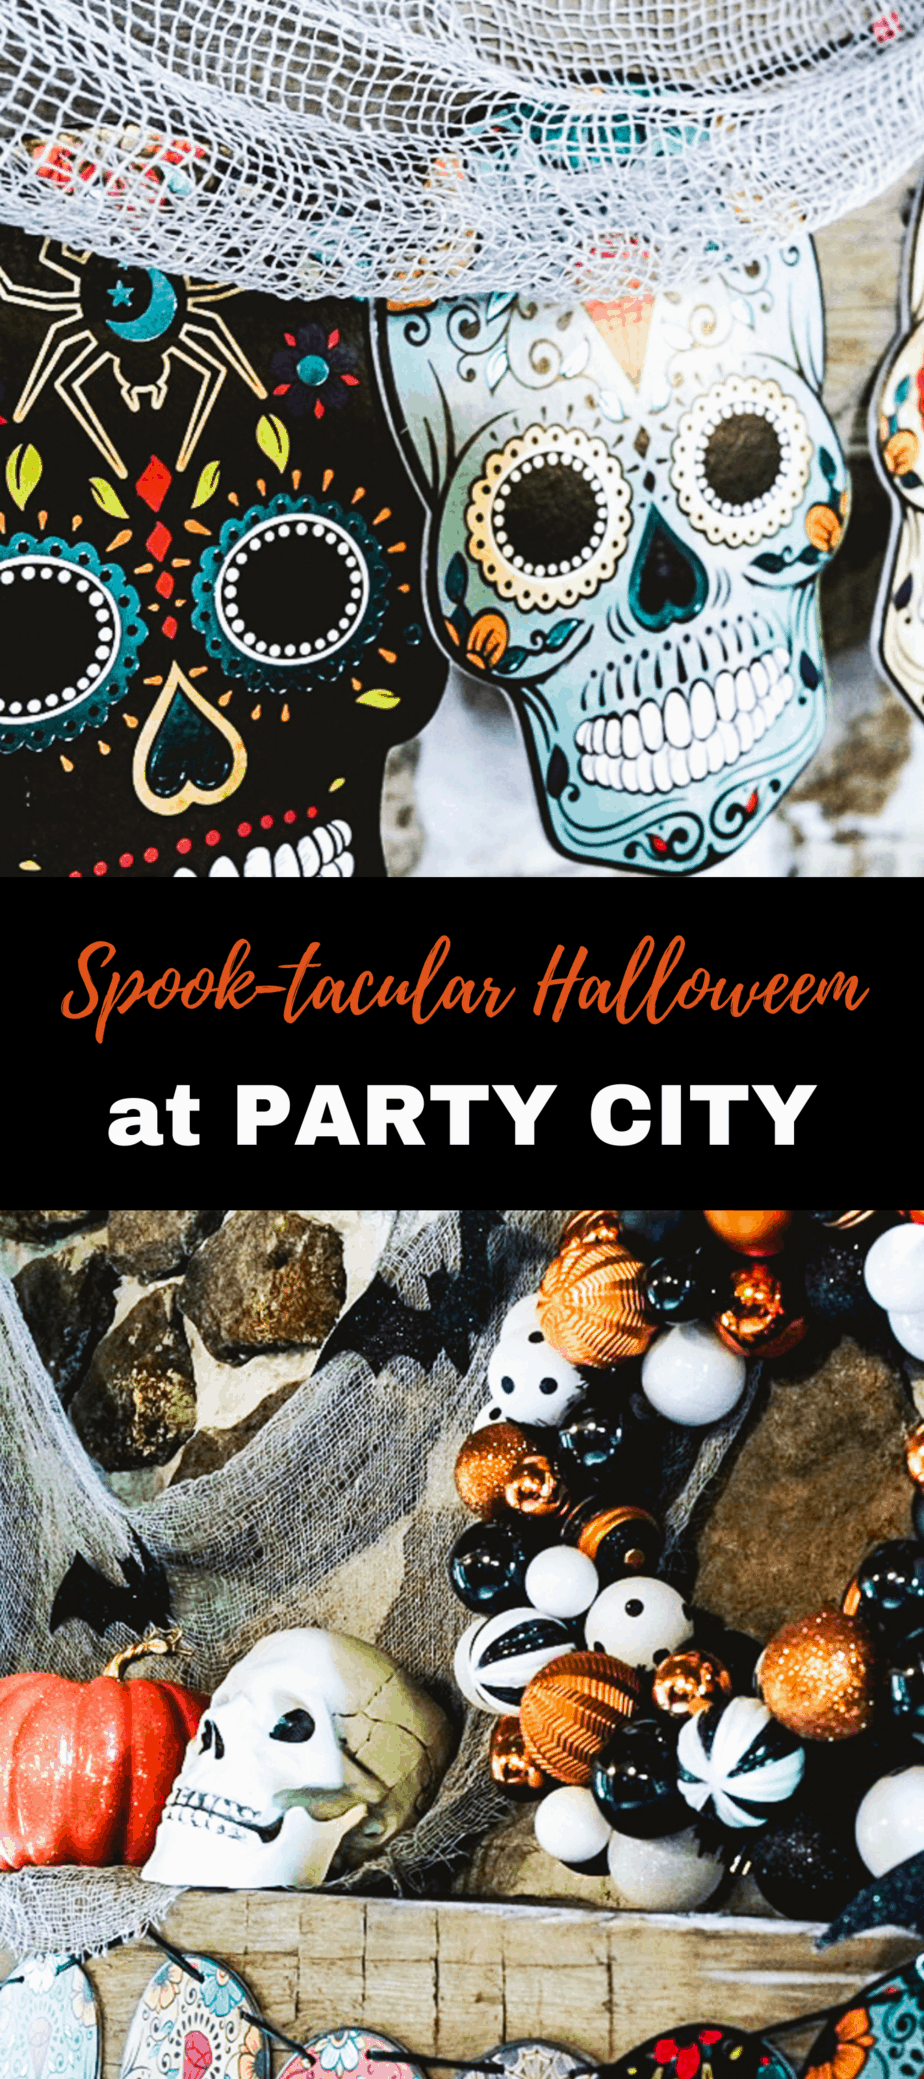 Party City to stock up on affordable Halloween décor.